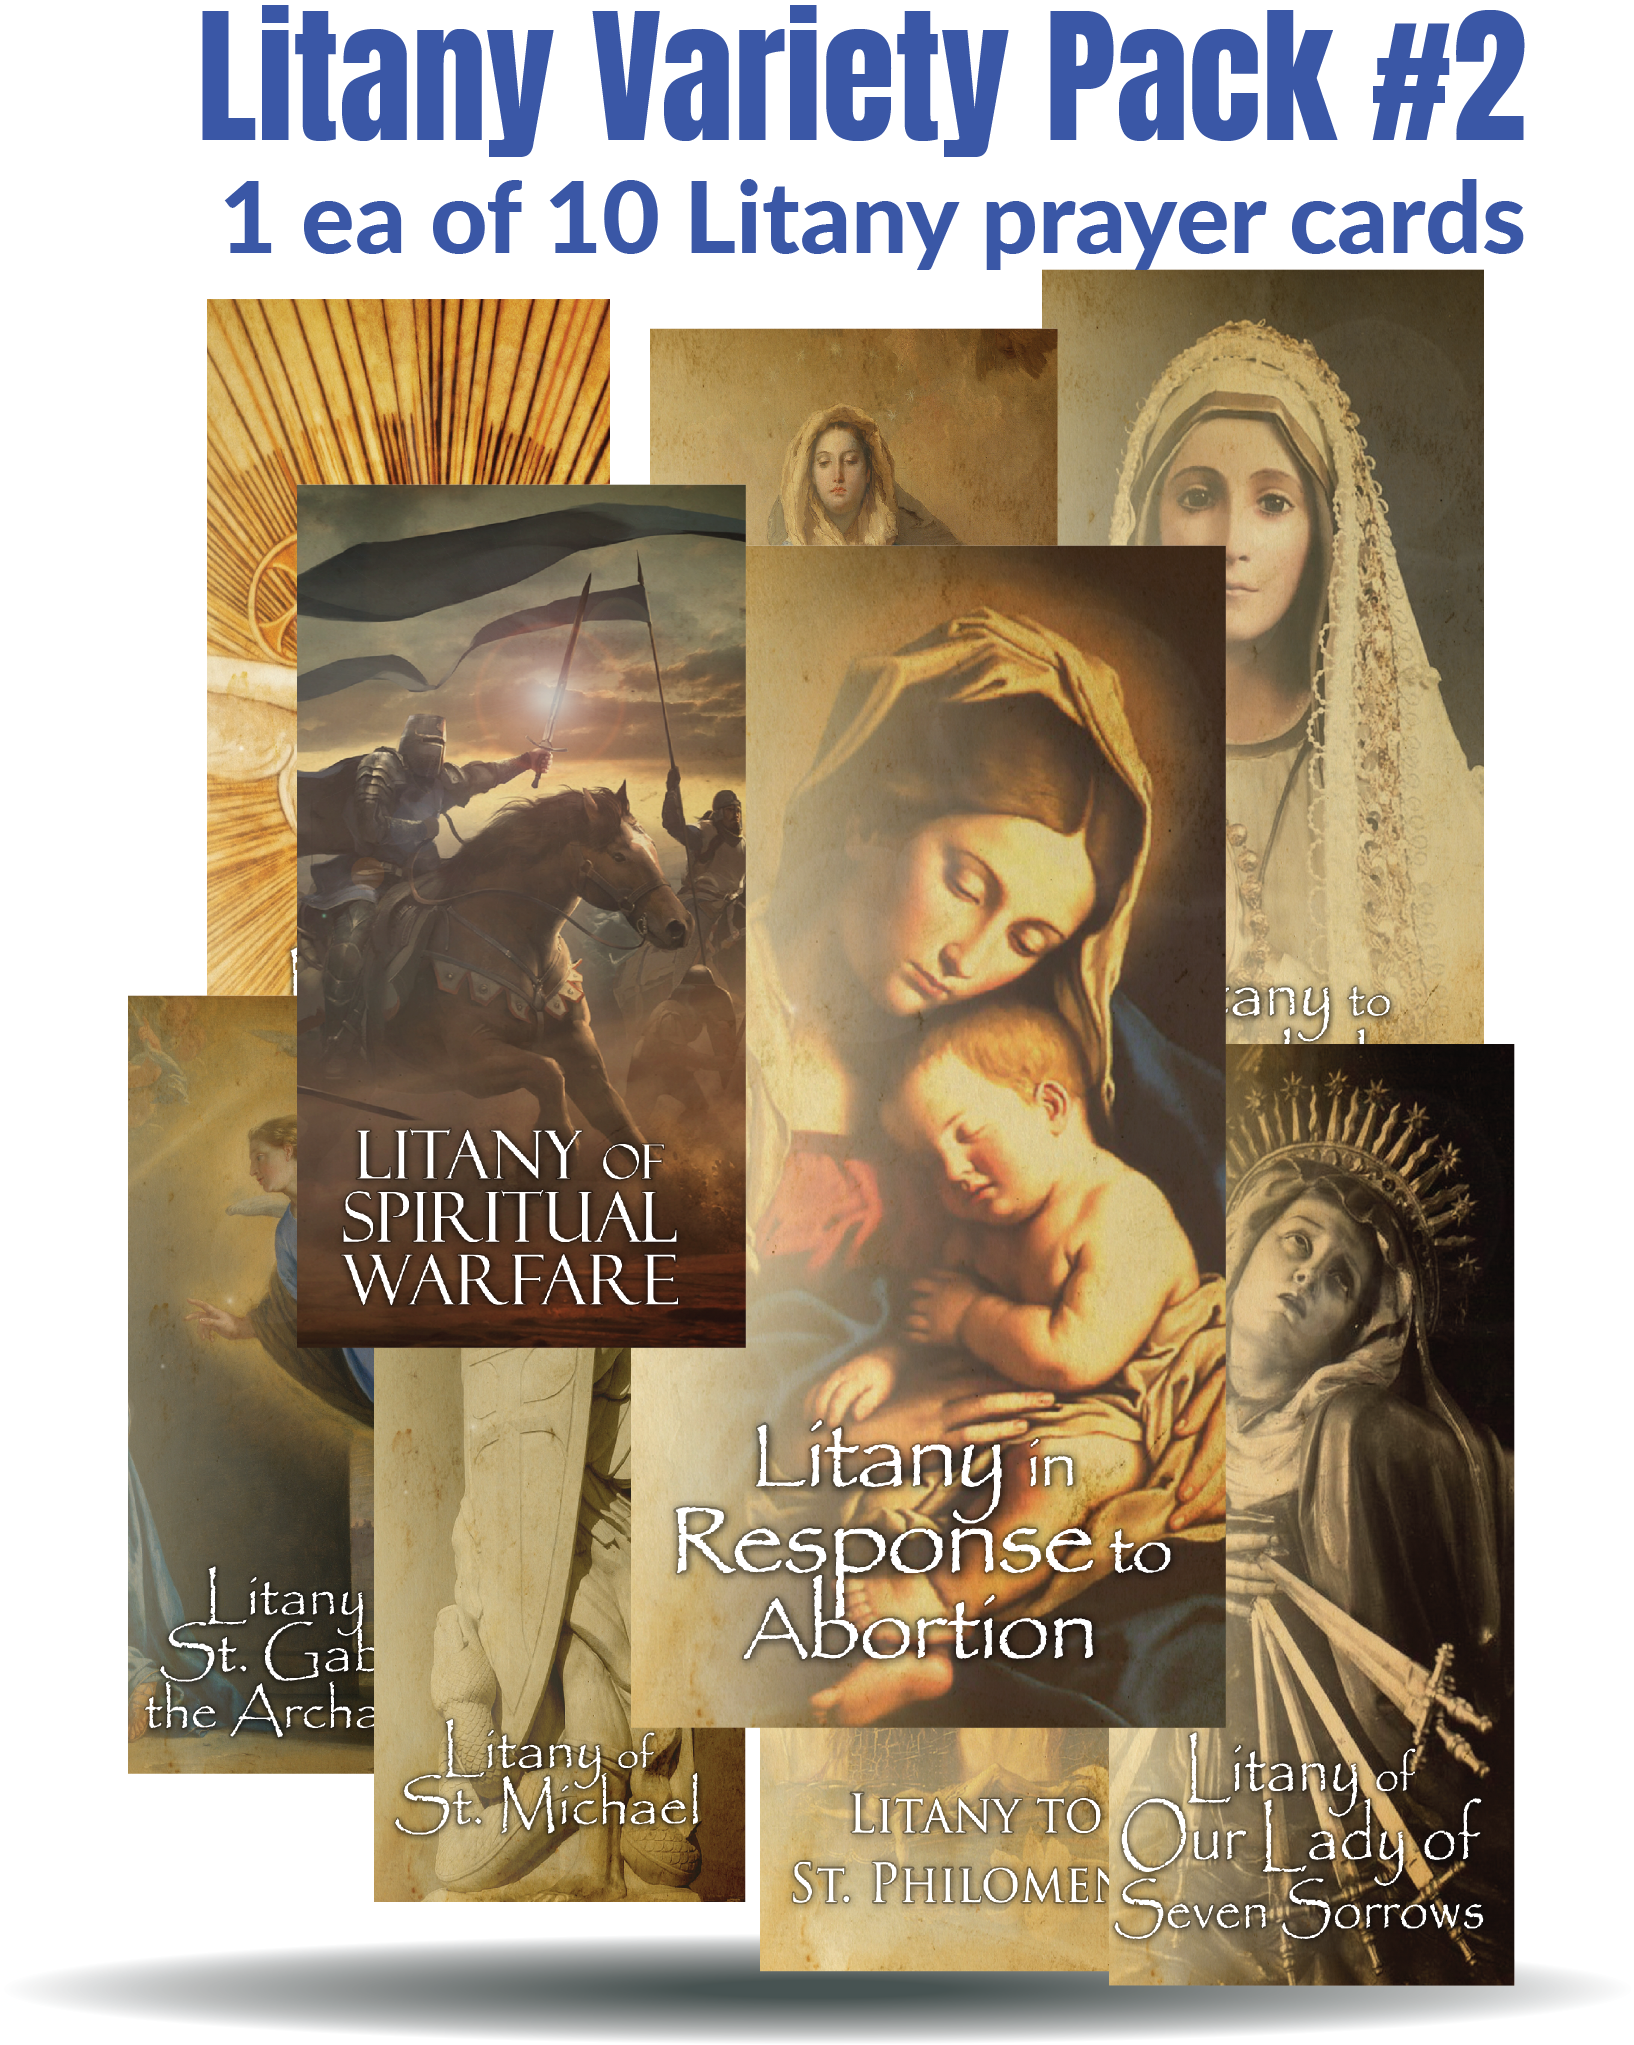 Litany Variety Pack #2 (1 ea. of all 10 cards) $25 value